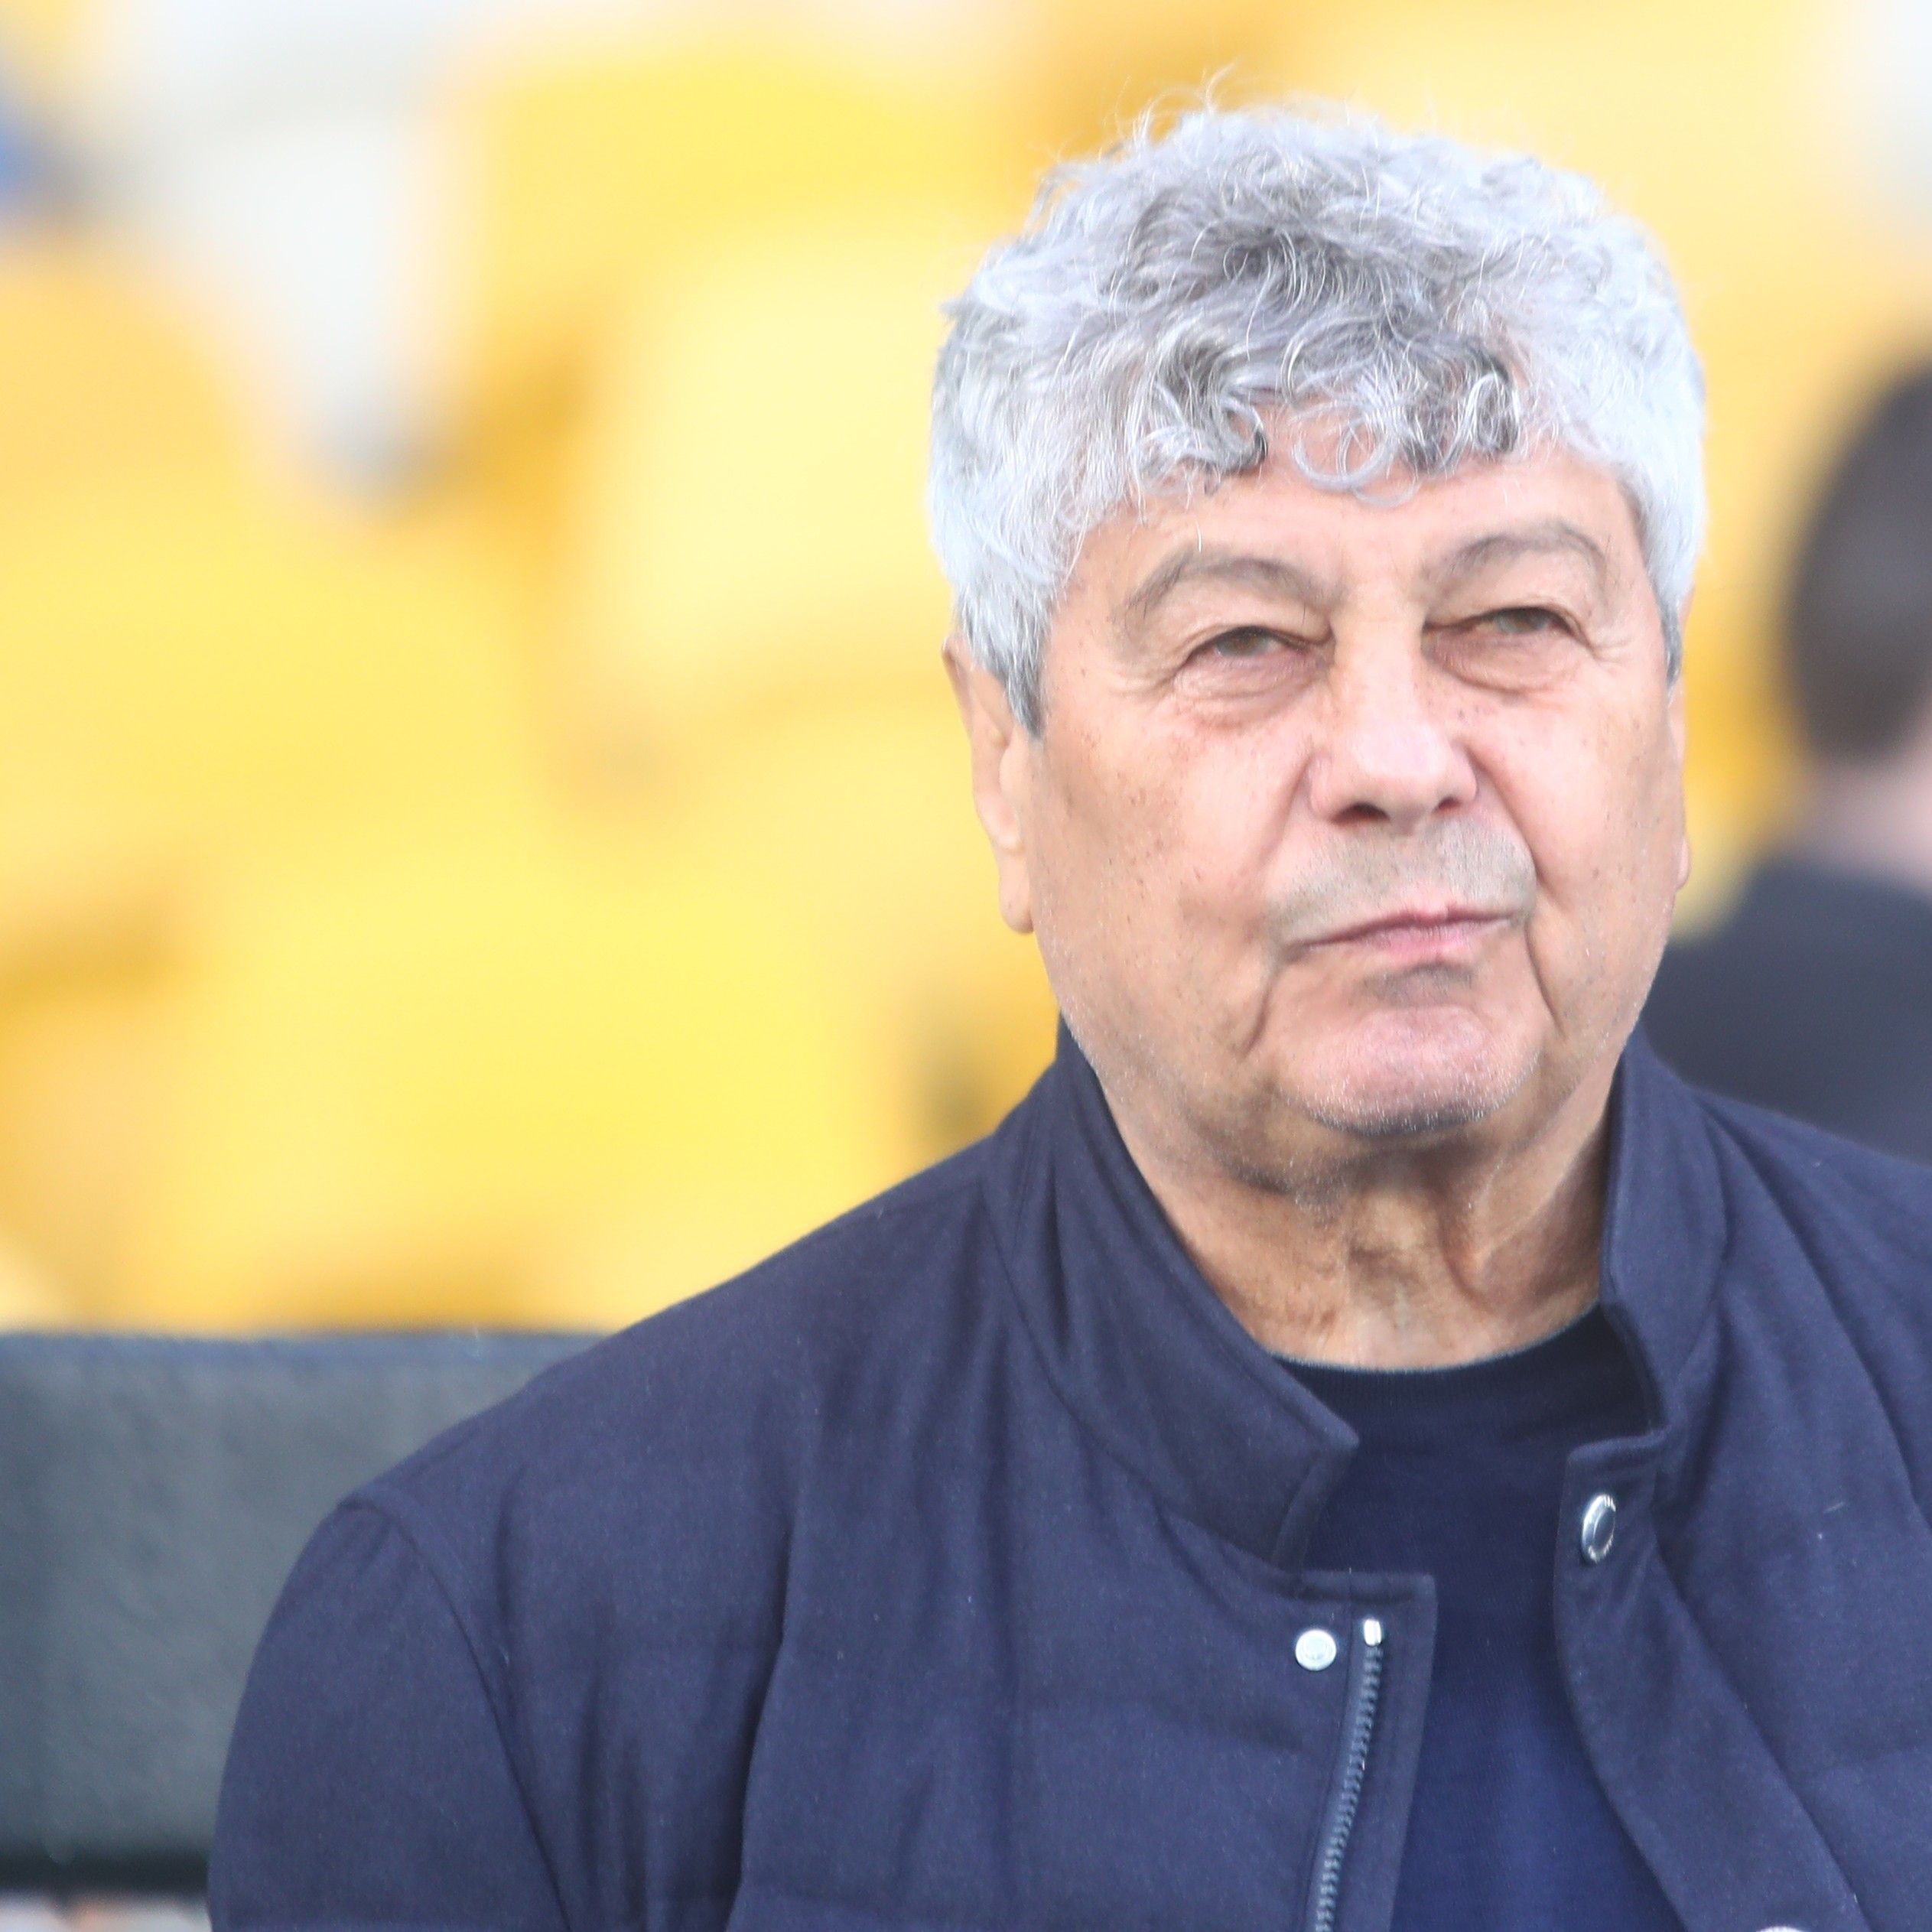 Mircea Lucescu: “The team played wisely and carried out my plan”